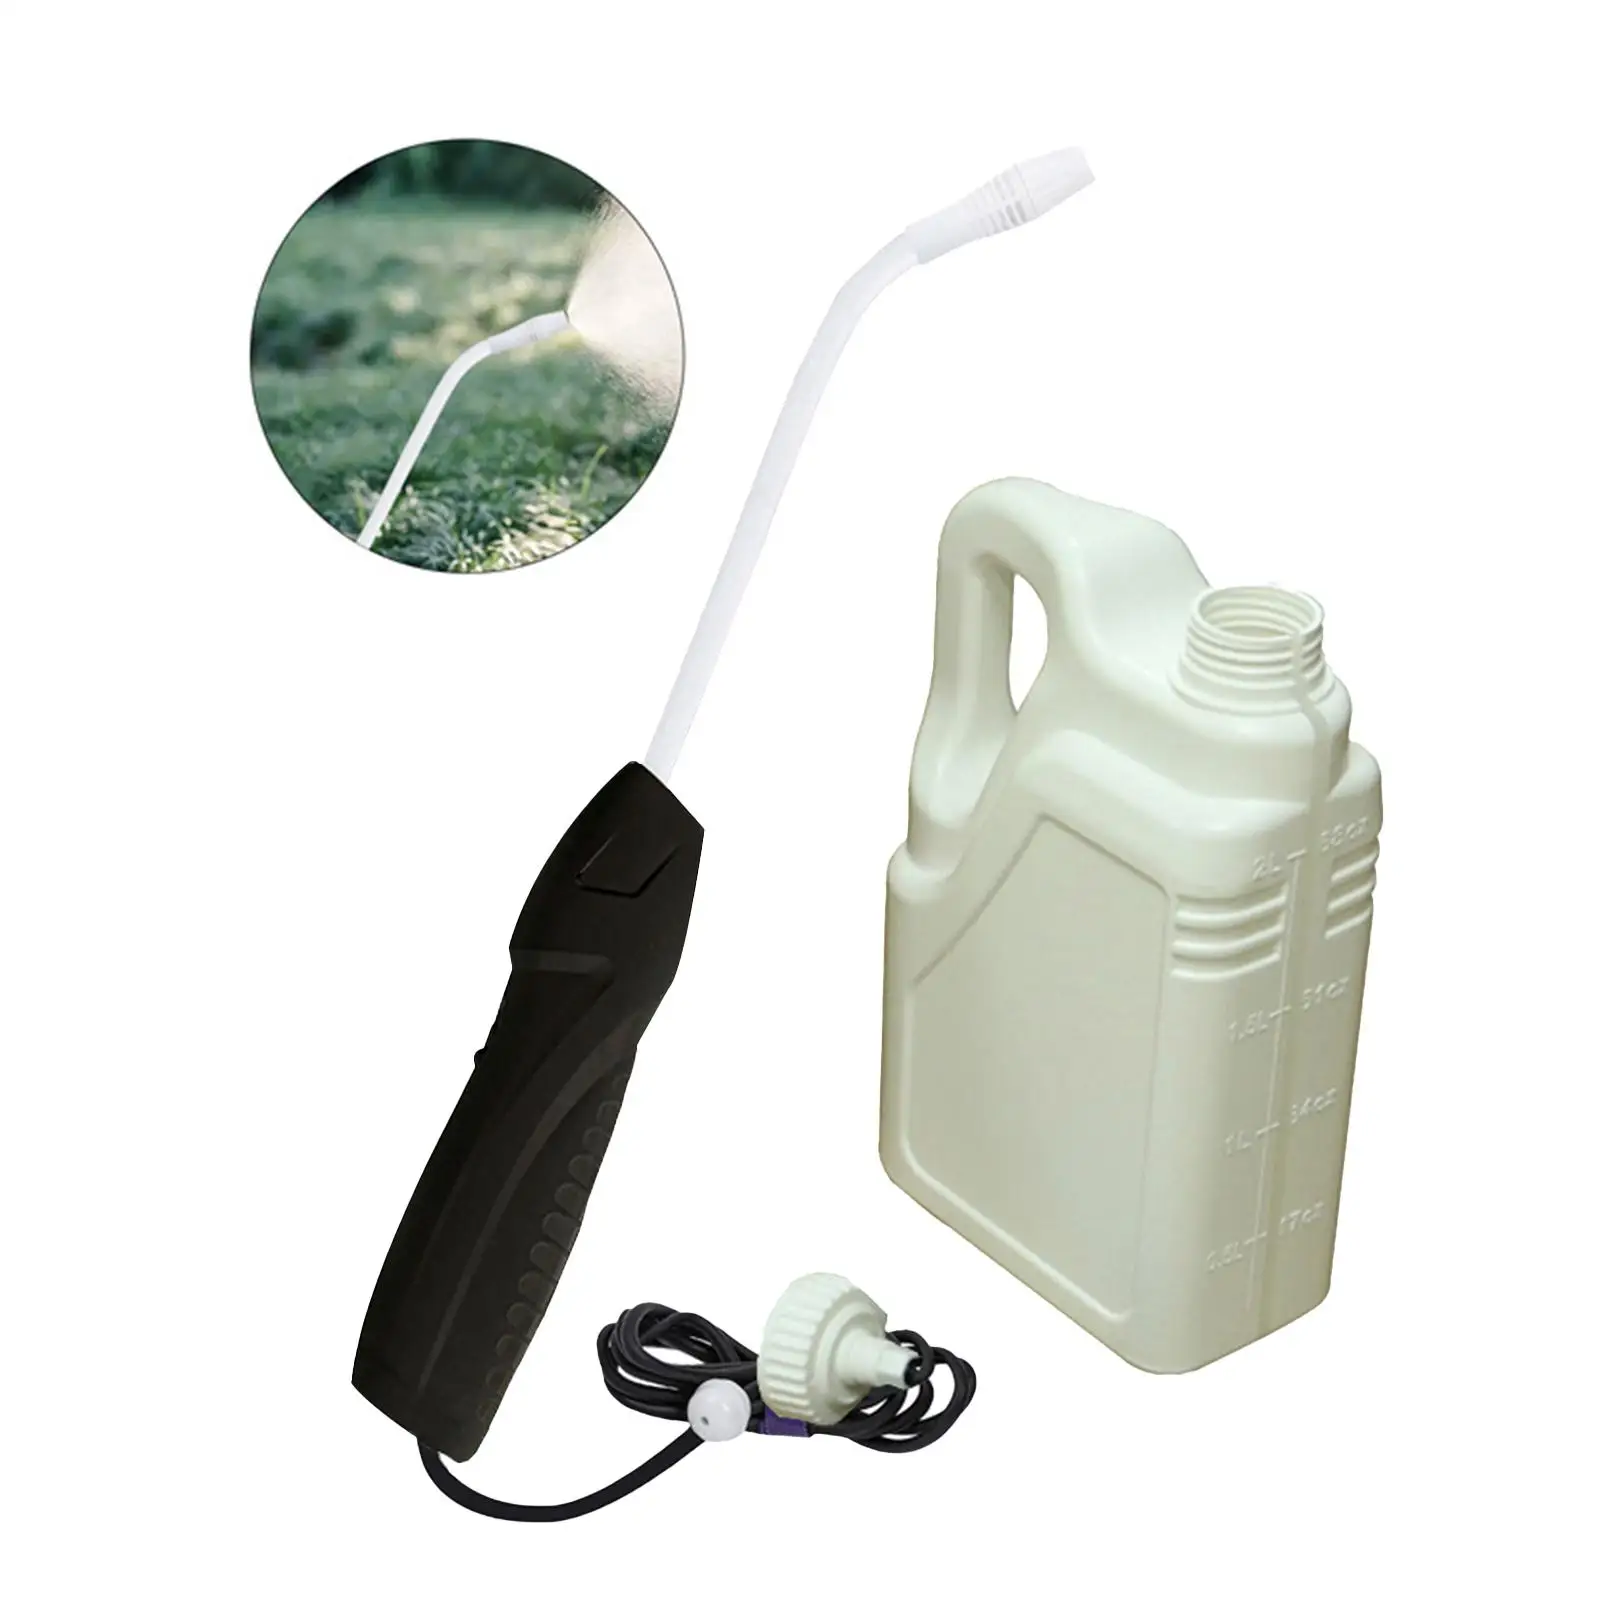 Rechargeable Spray Mister and Water Hose Flexible Electric Sprayer for Garden Outdoor Car Washing Plant Watering Yard